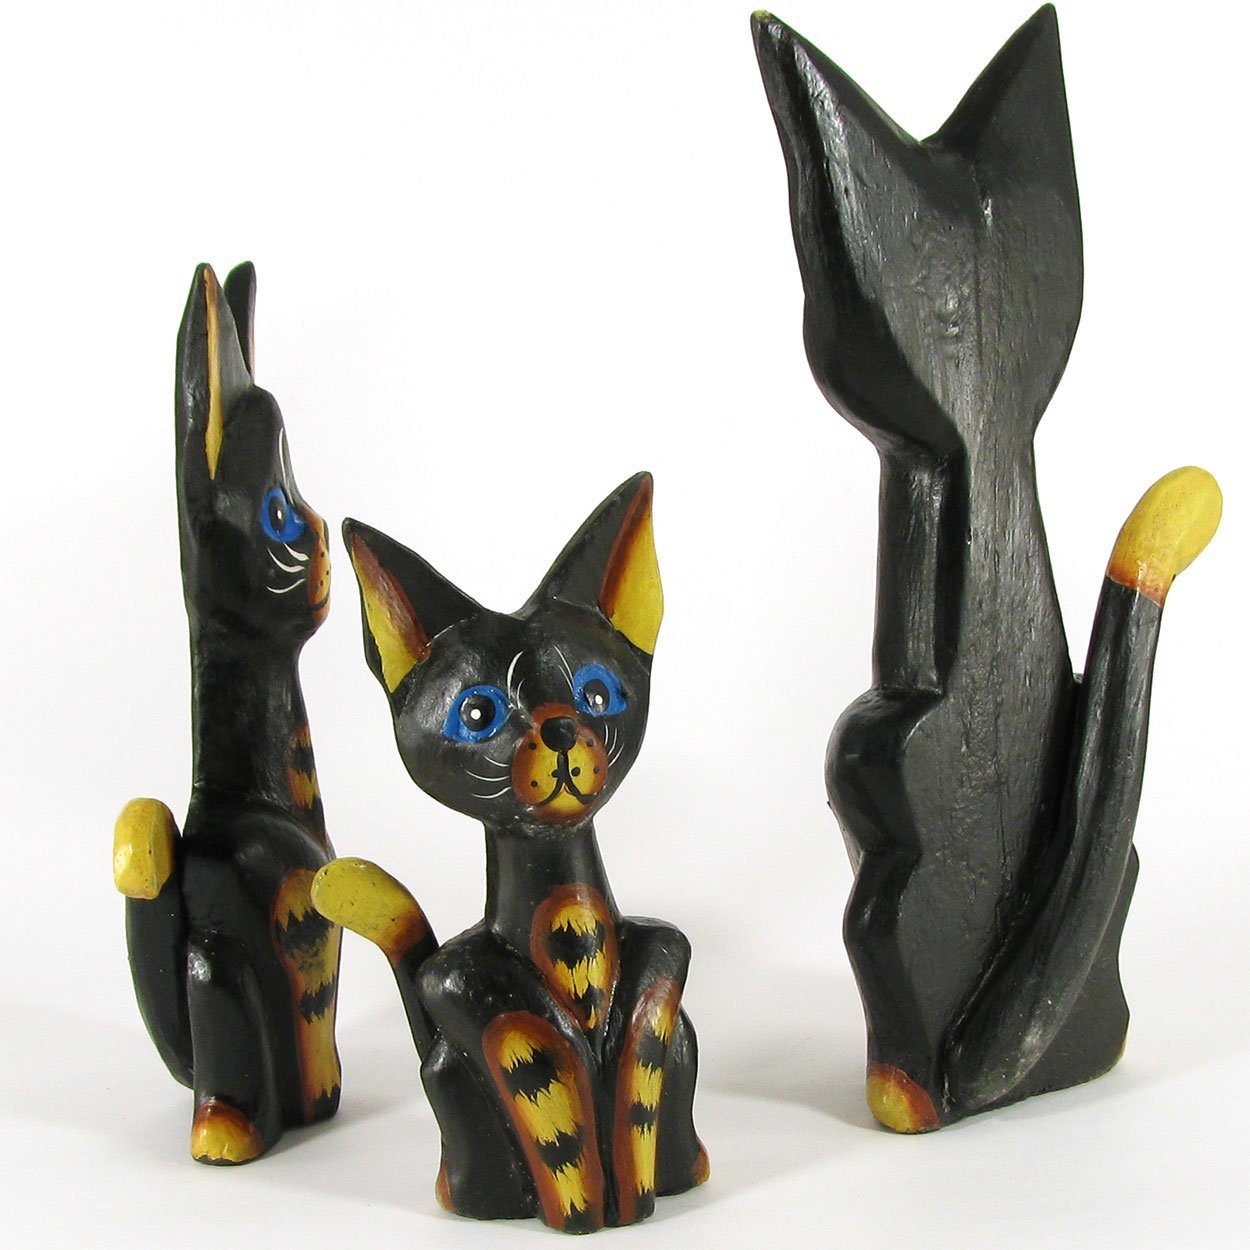 140045 - Set of Three 6-10in Cats Painted Rustic Wood Folk Art Carvings - Black and Amber